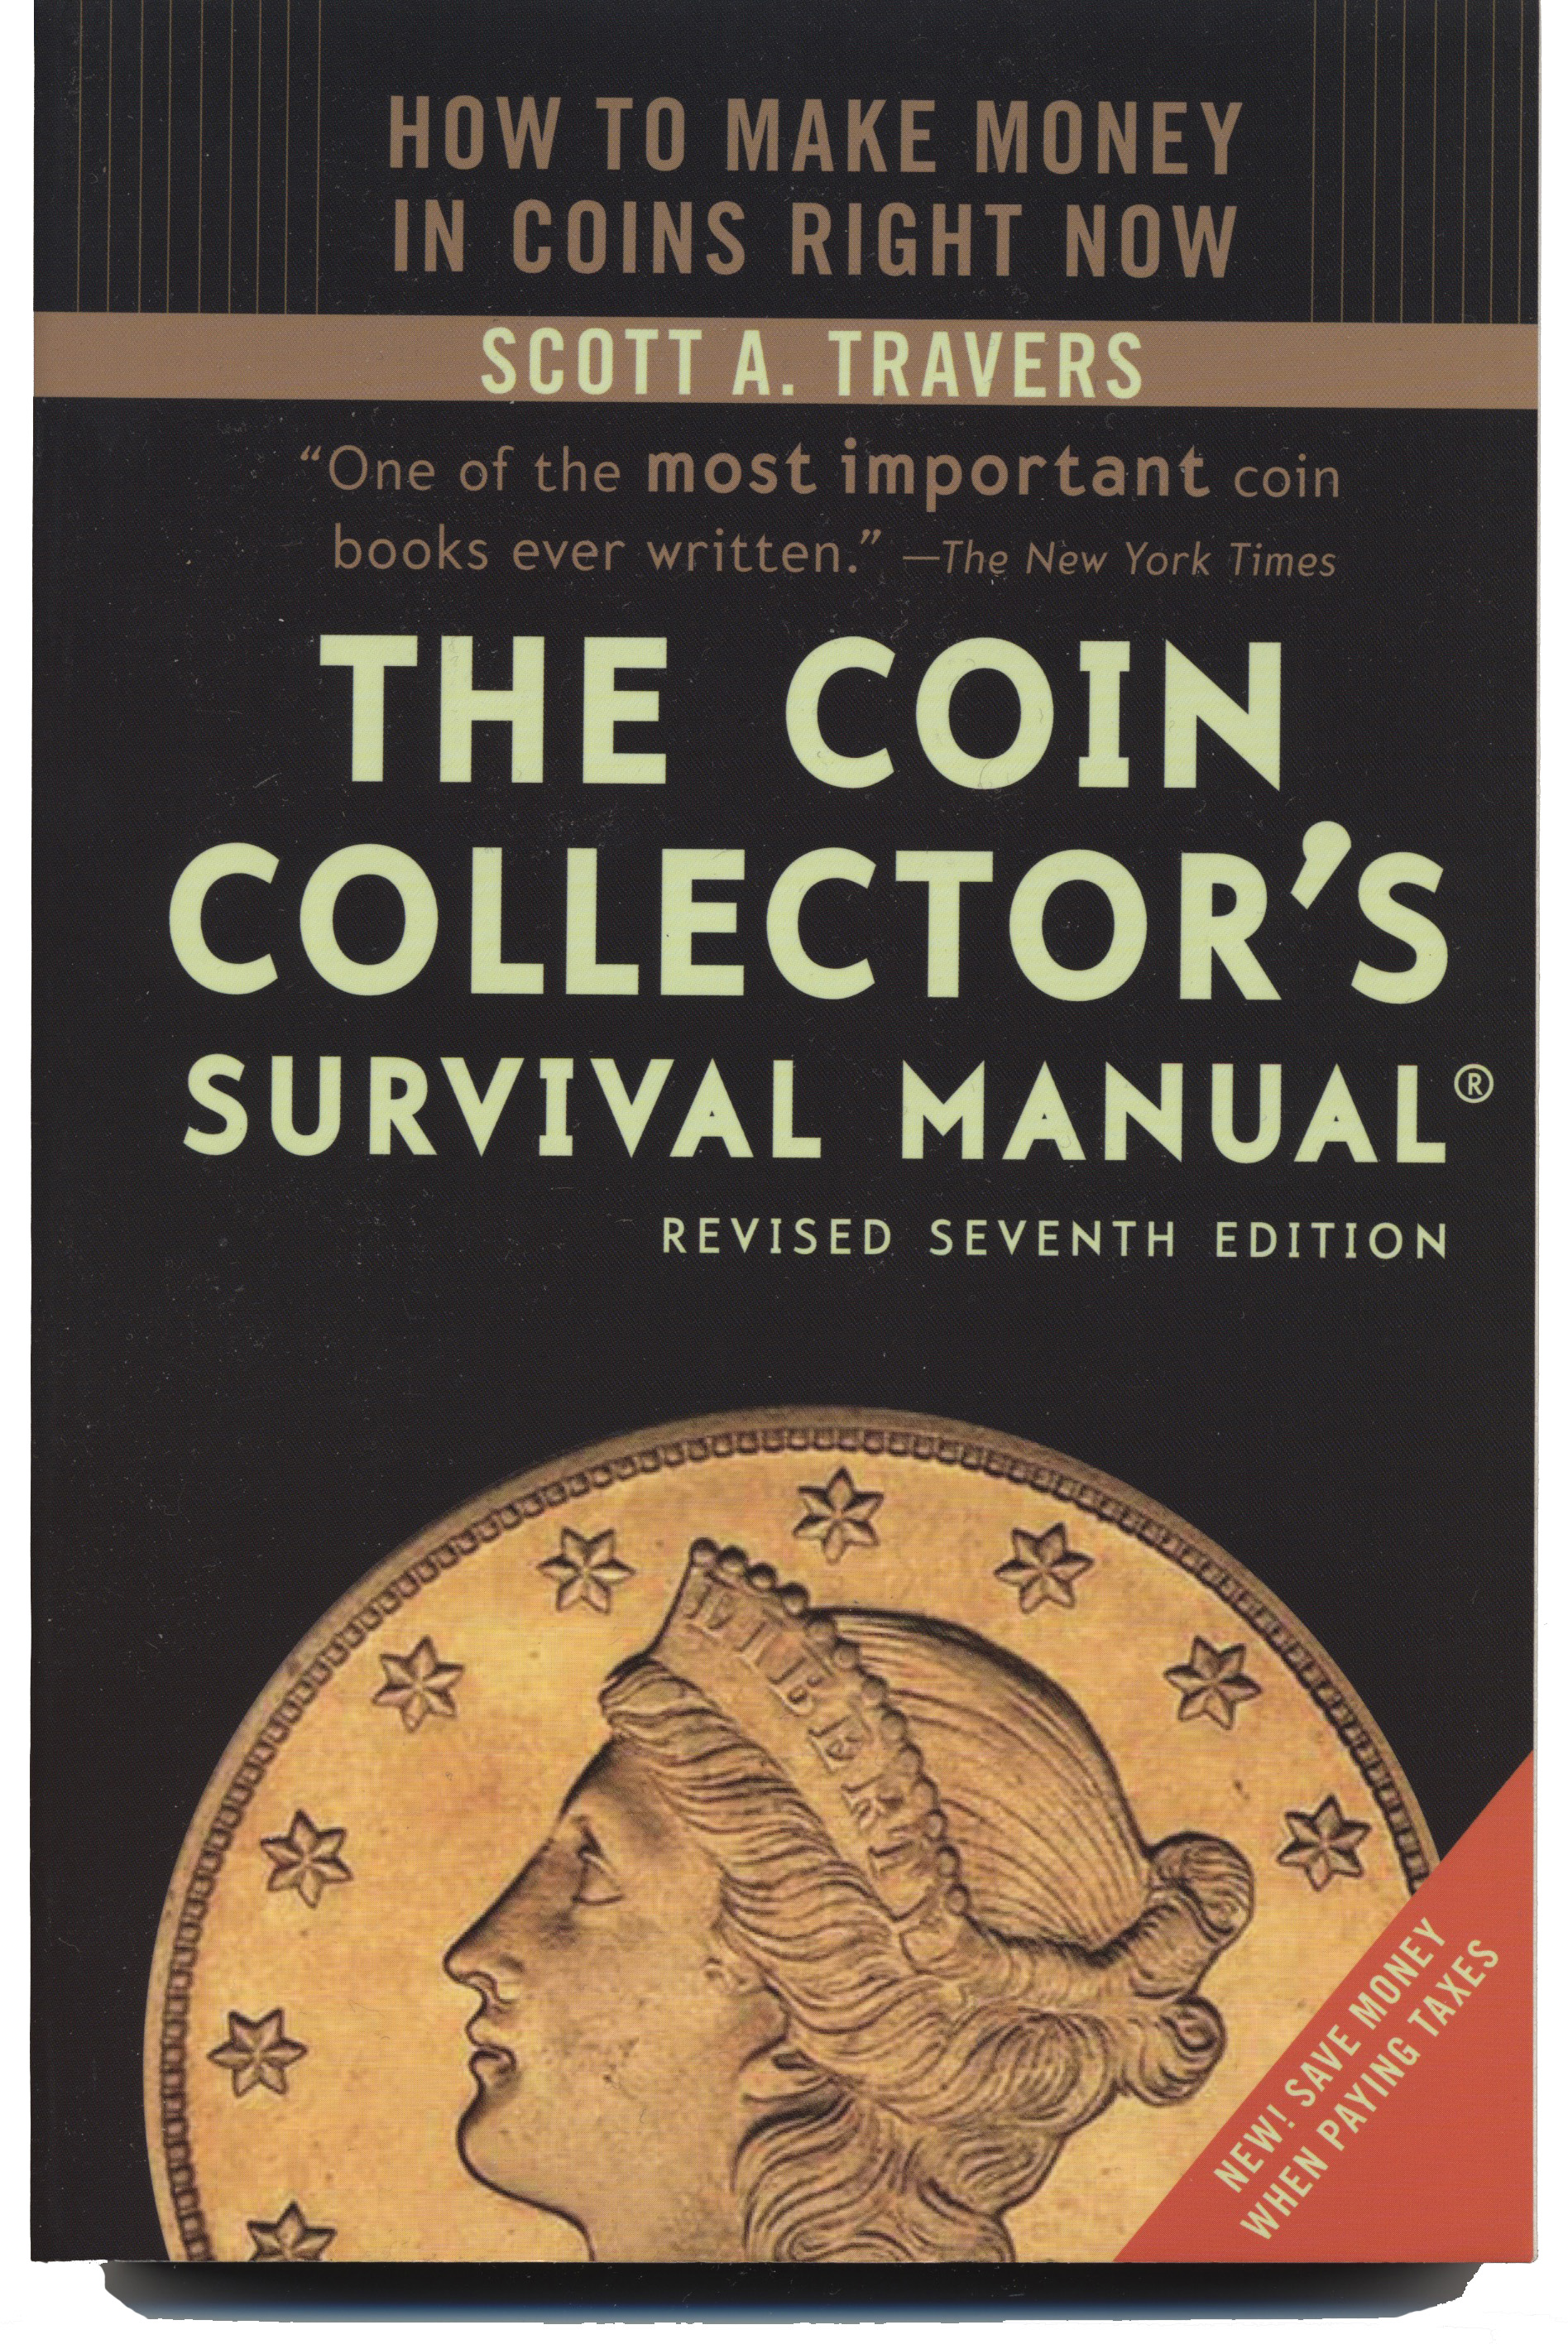 The Coin Collector's Survival Manual, Revised Seventh Edition by